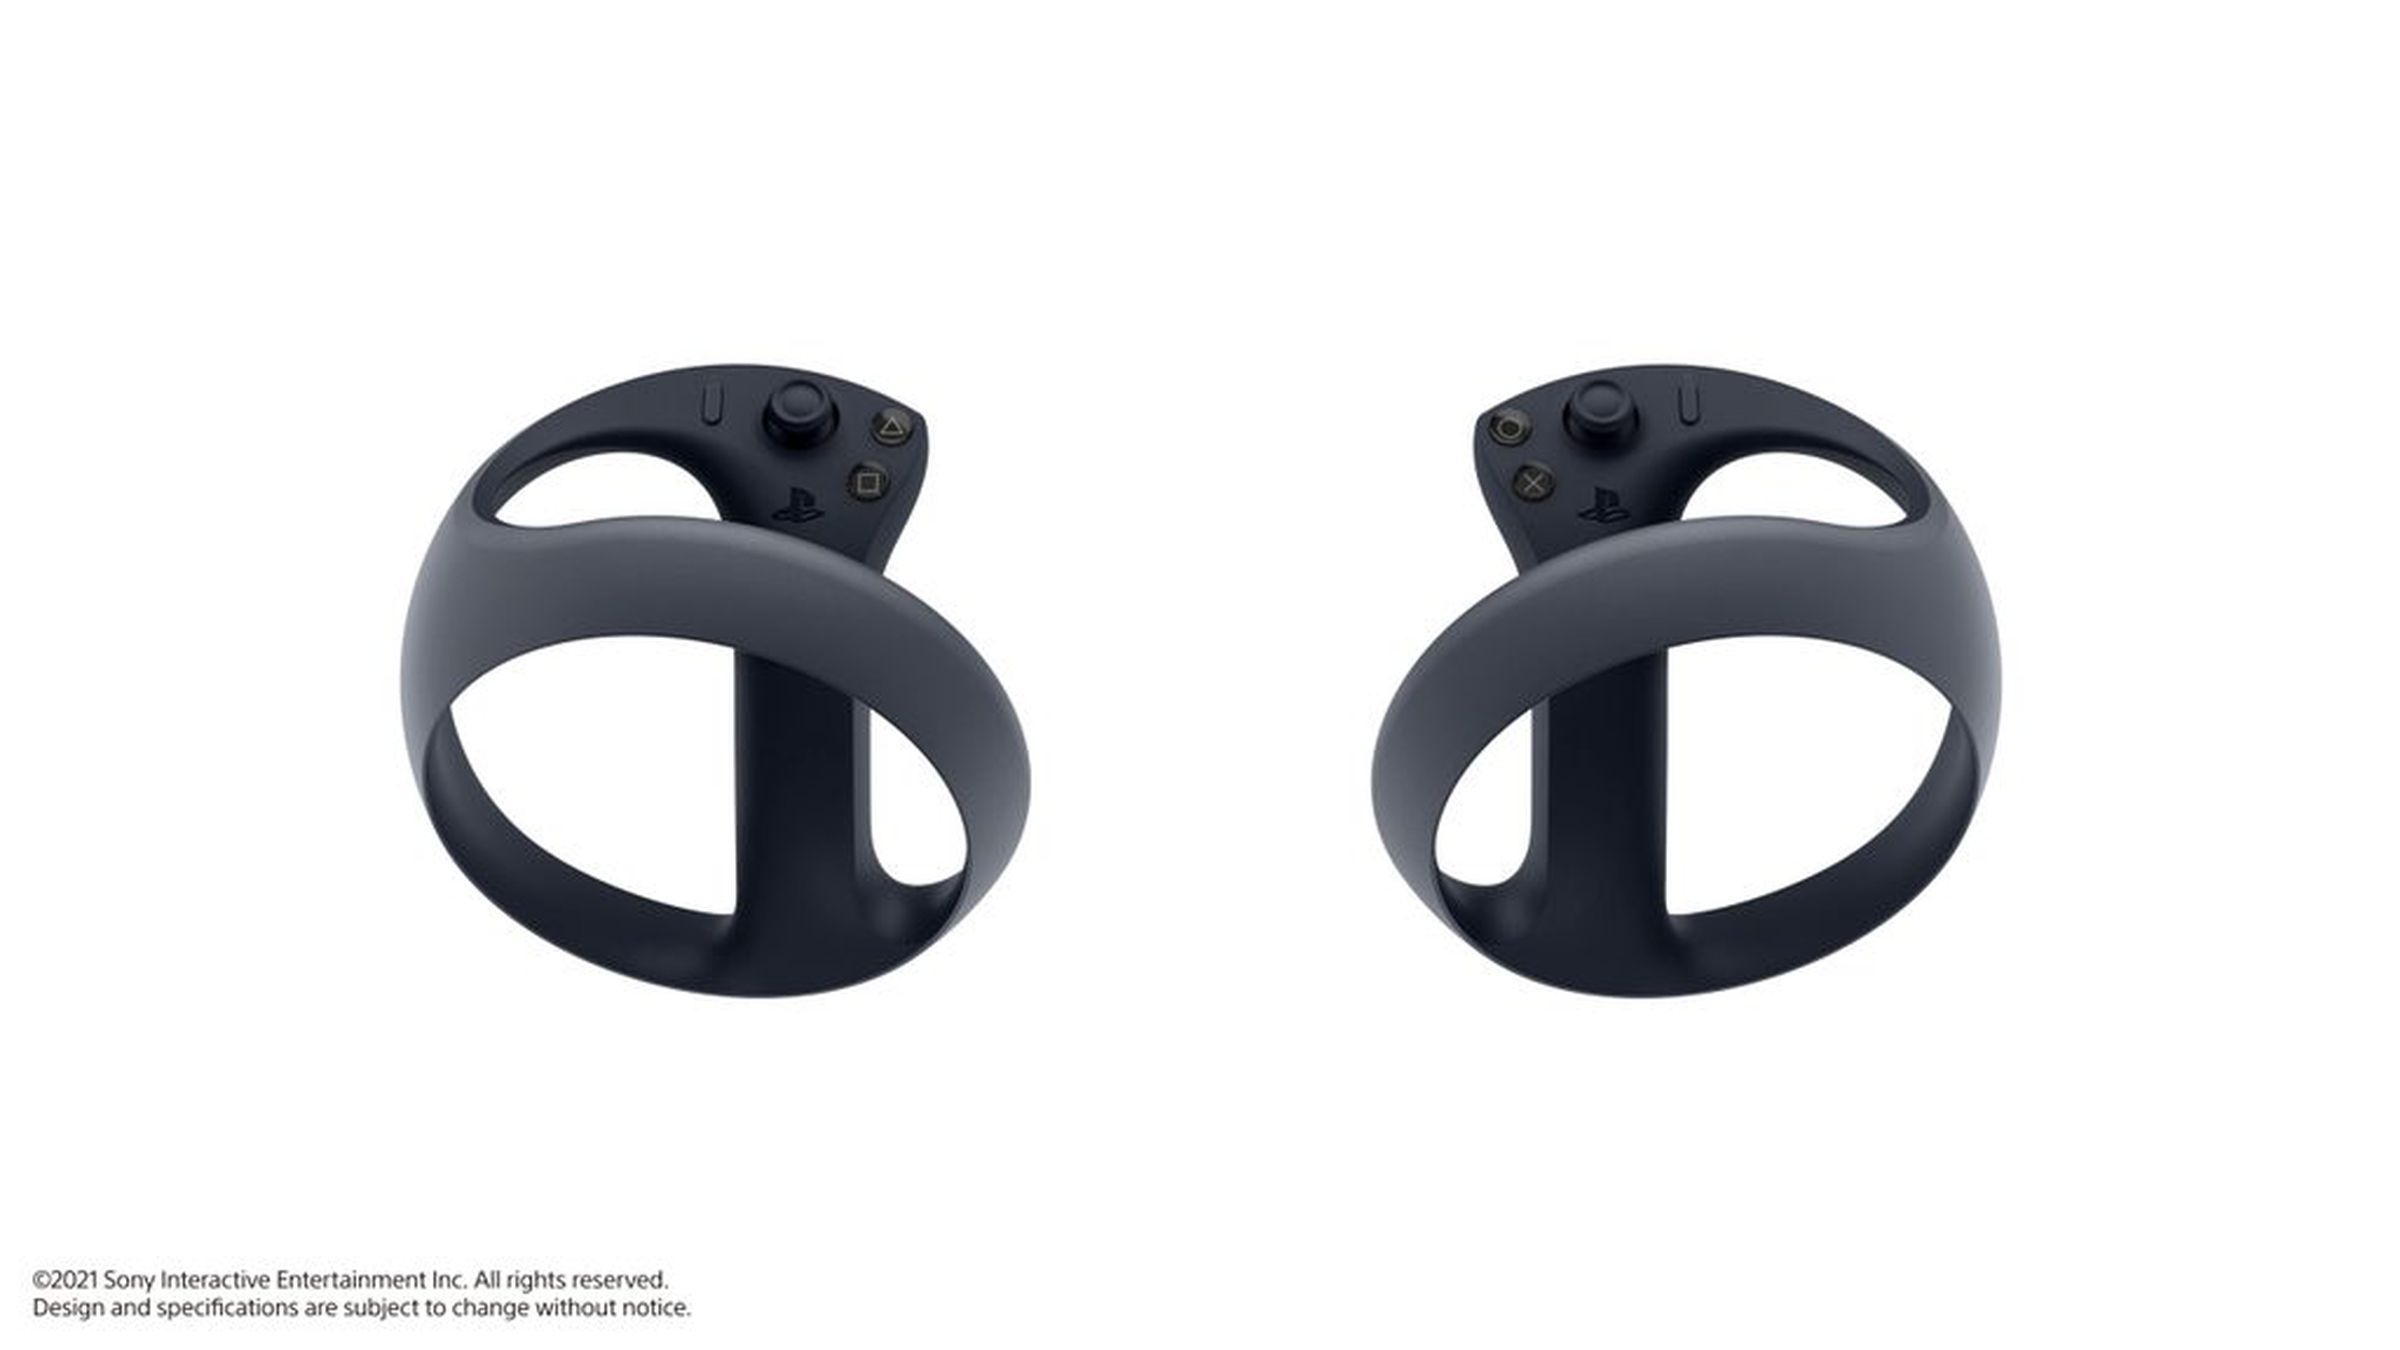 Sony’s new PS5 VR controllers.